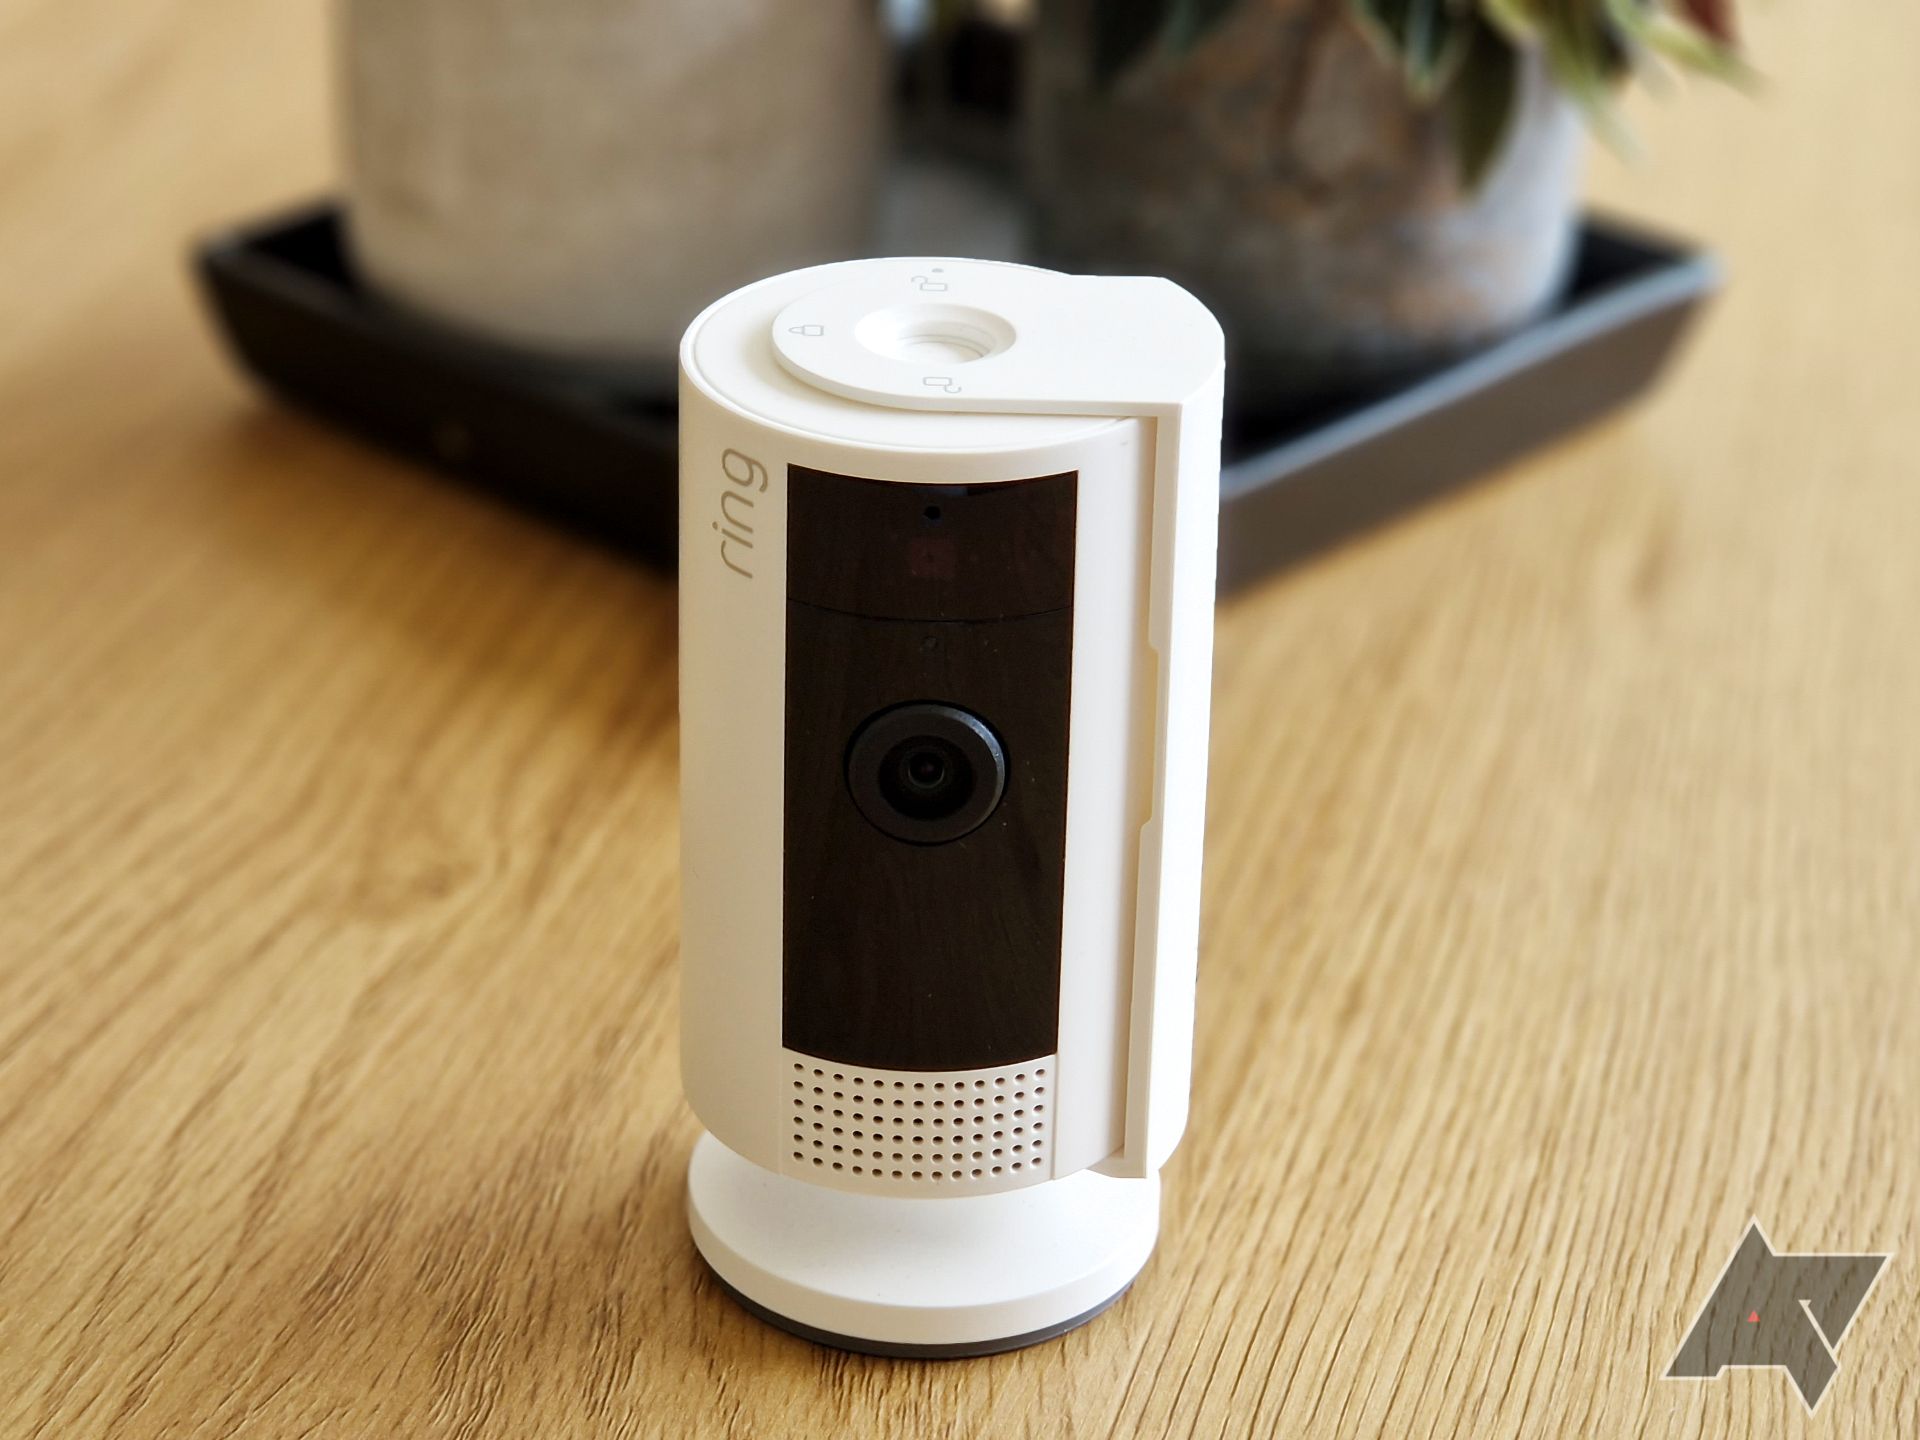 Neighbour wins privacy row over smart doorbell and cameras